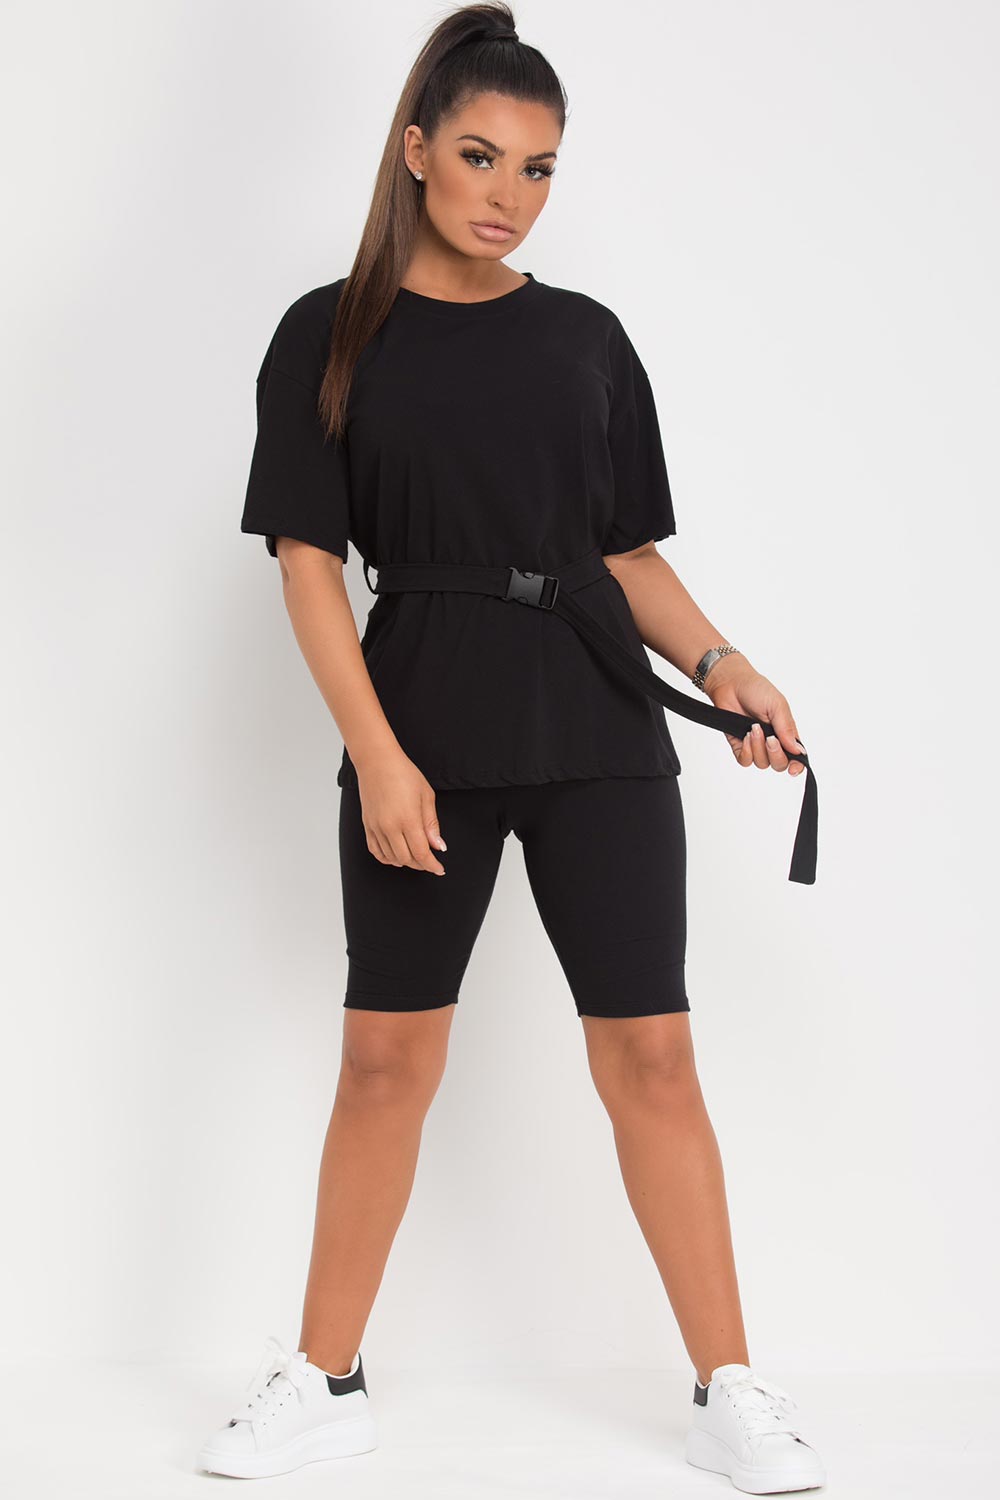 utility belt top and cycling shorts set black